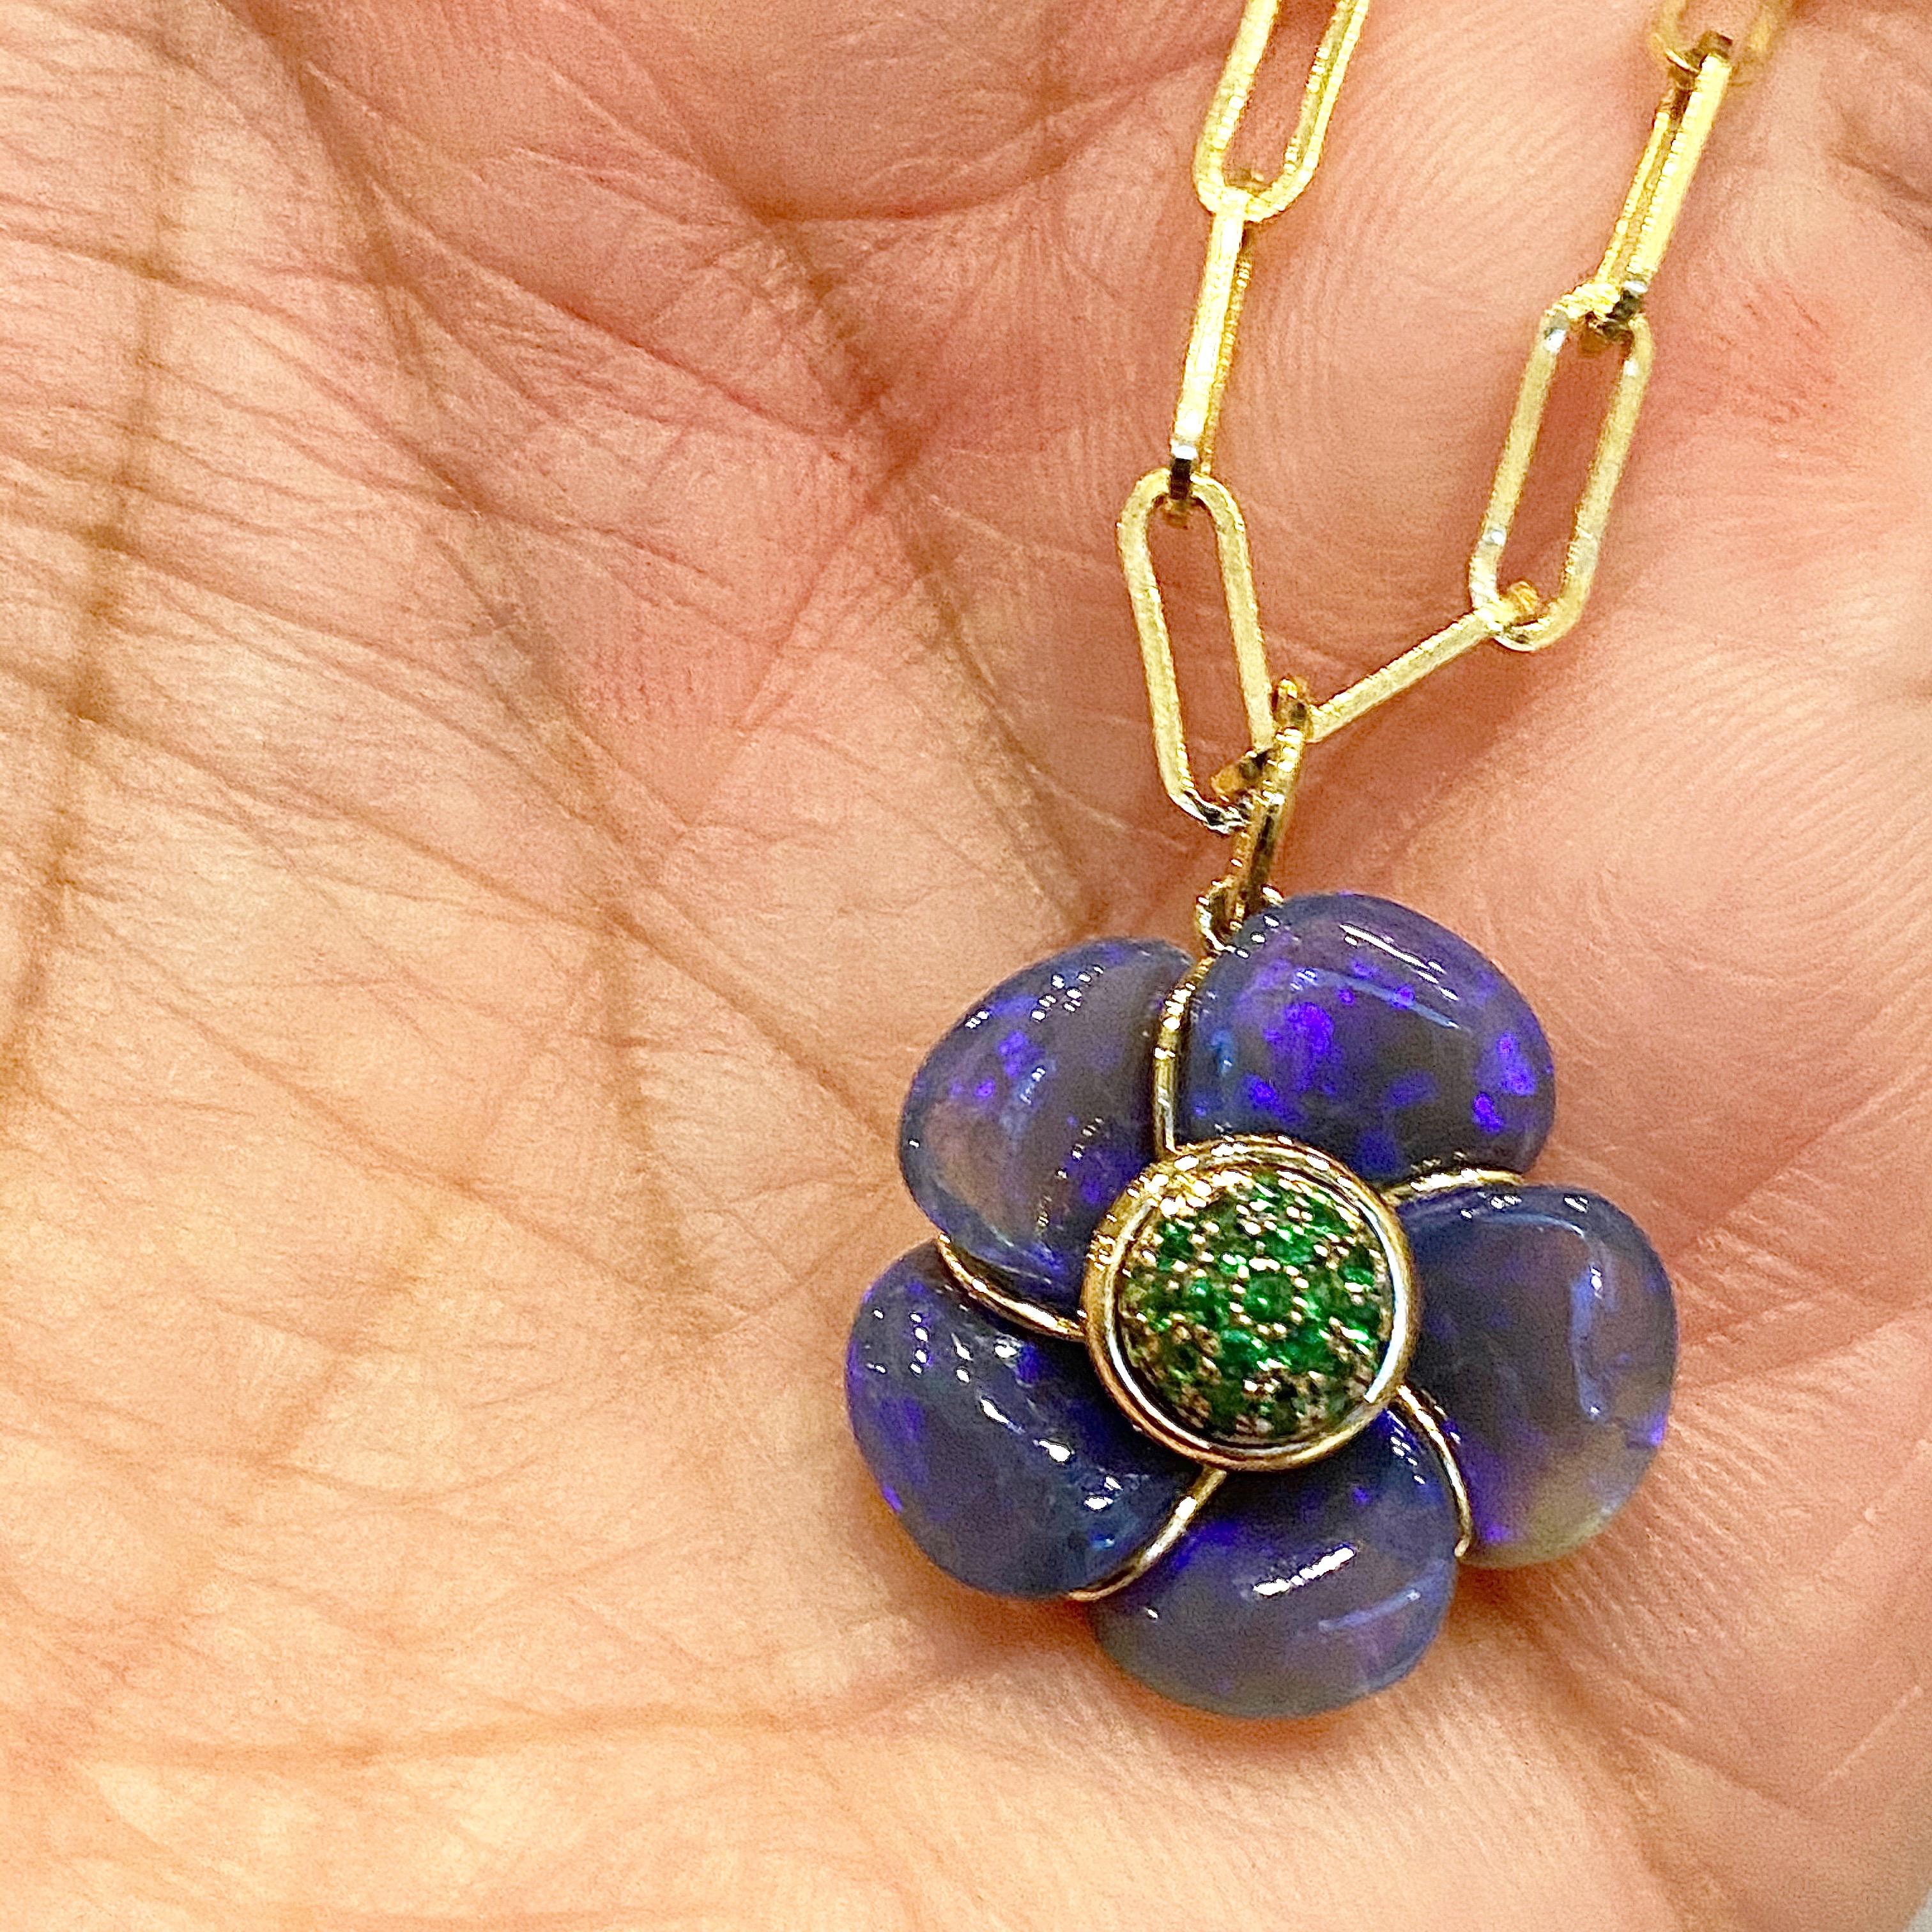 Created in 18kyg
Hand carved australian opal flower 9 cts approx
Tsavorite 
Chain sold separately
One of a kind

About the Designers

Drawing inspiration from little things, Dharmesh & Namrata Kothari have created an extraordinary and refreshing